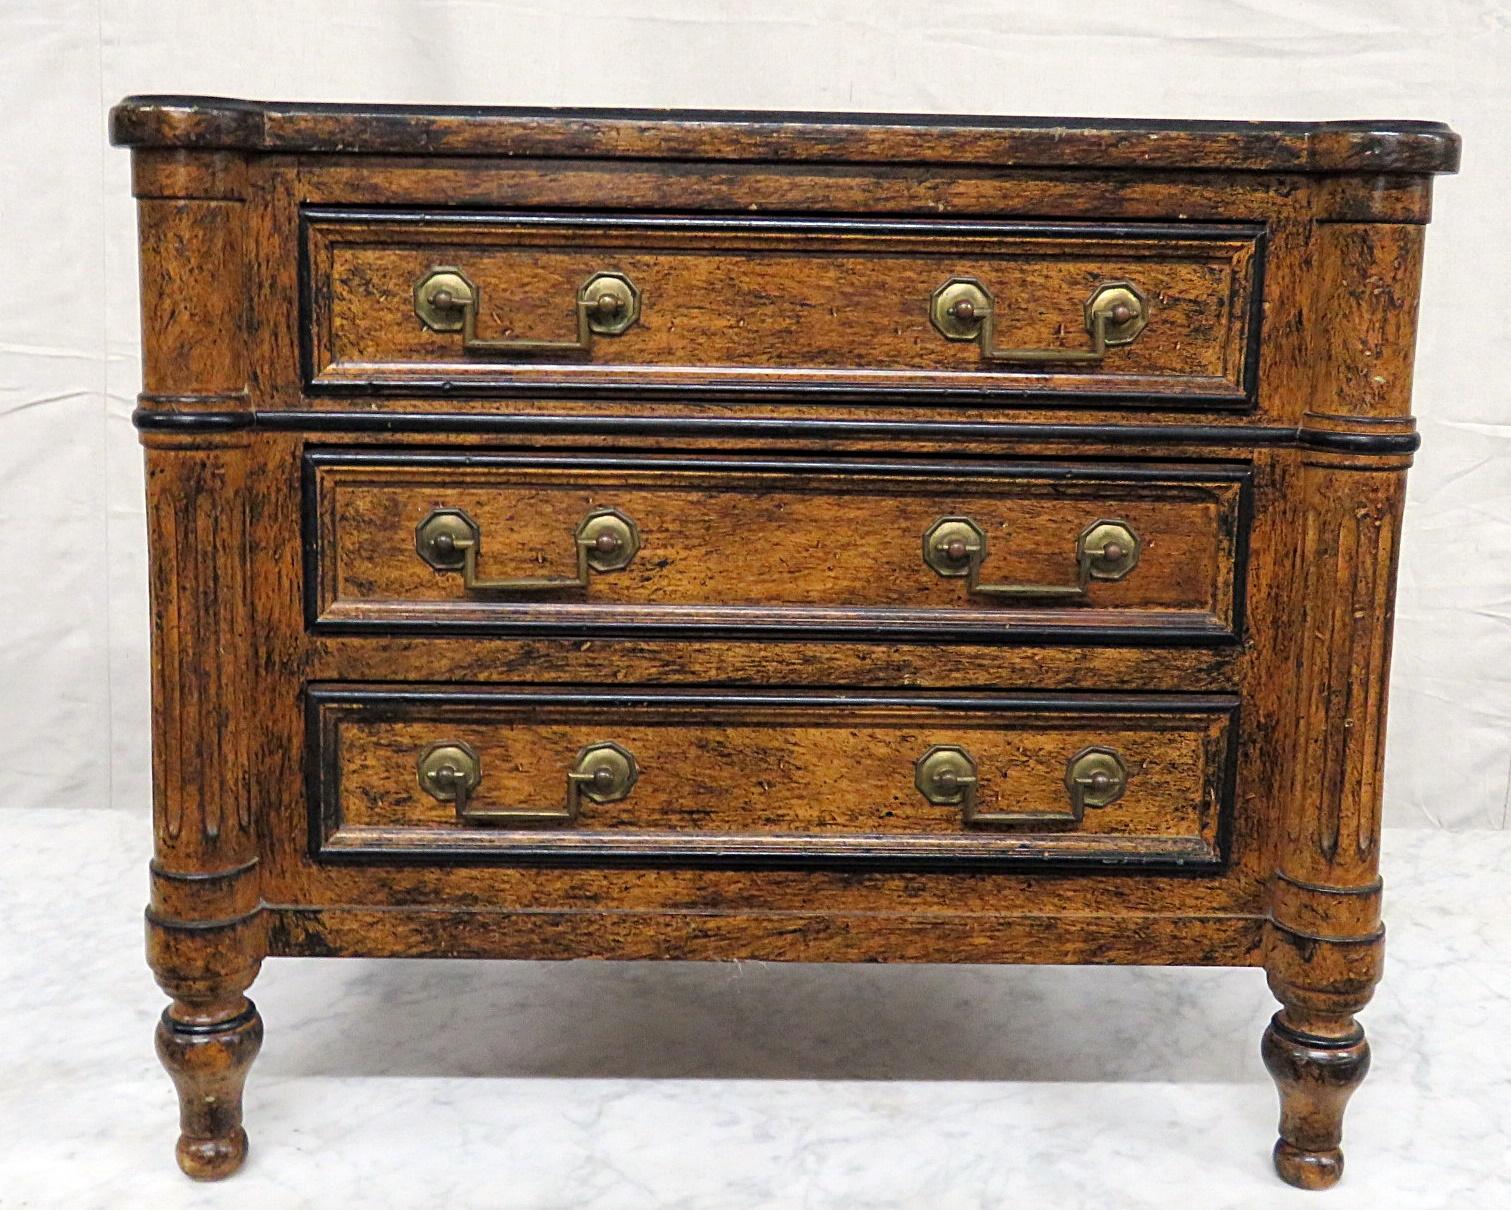 Lewis Mittman 3-drawer petite commode with a distressed finish and ebonized accents.